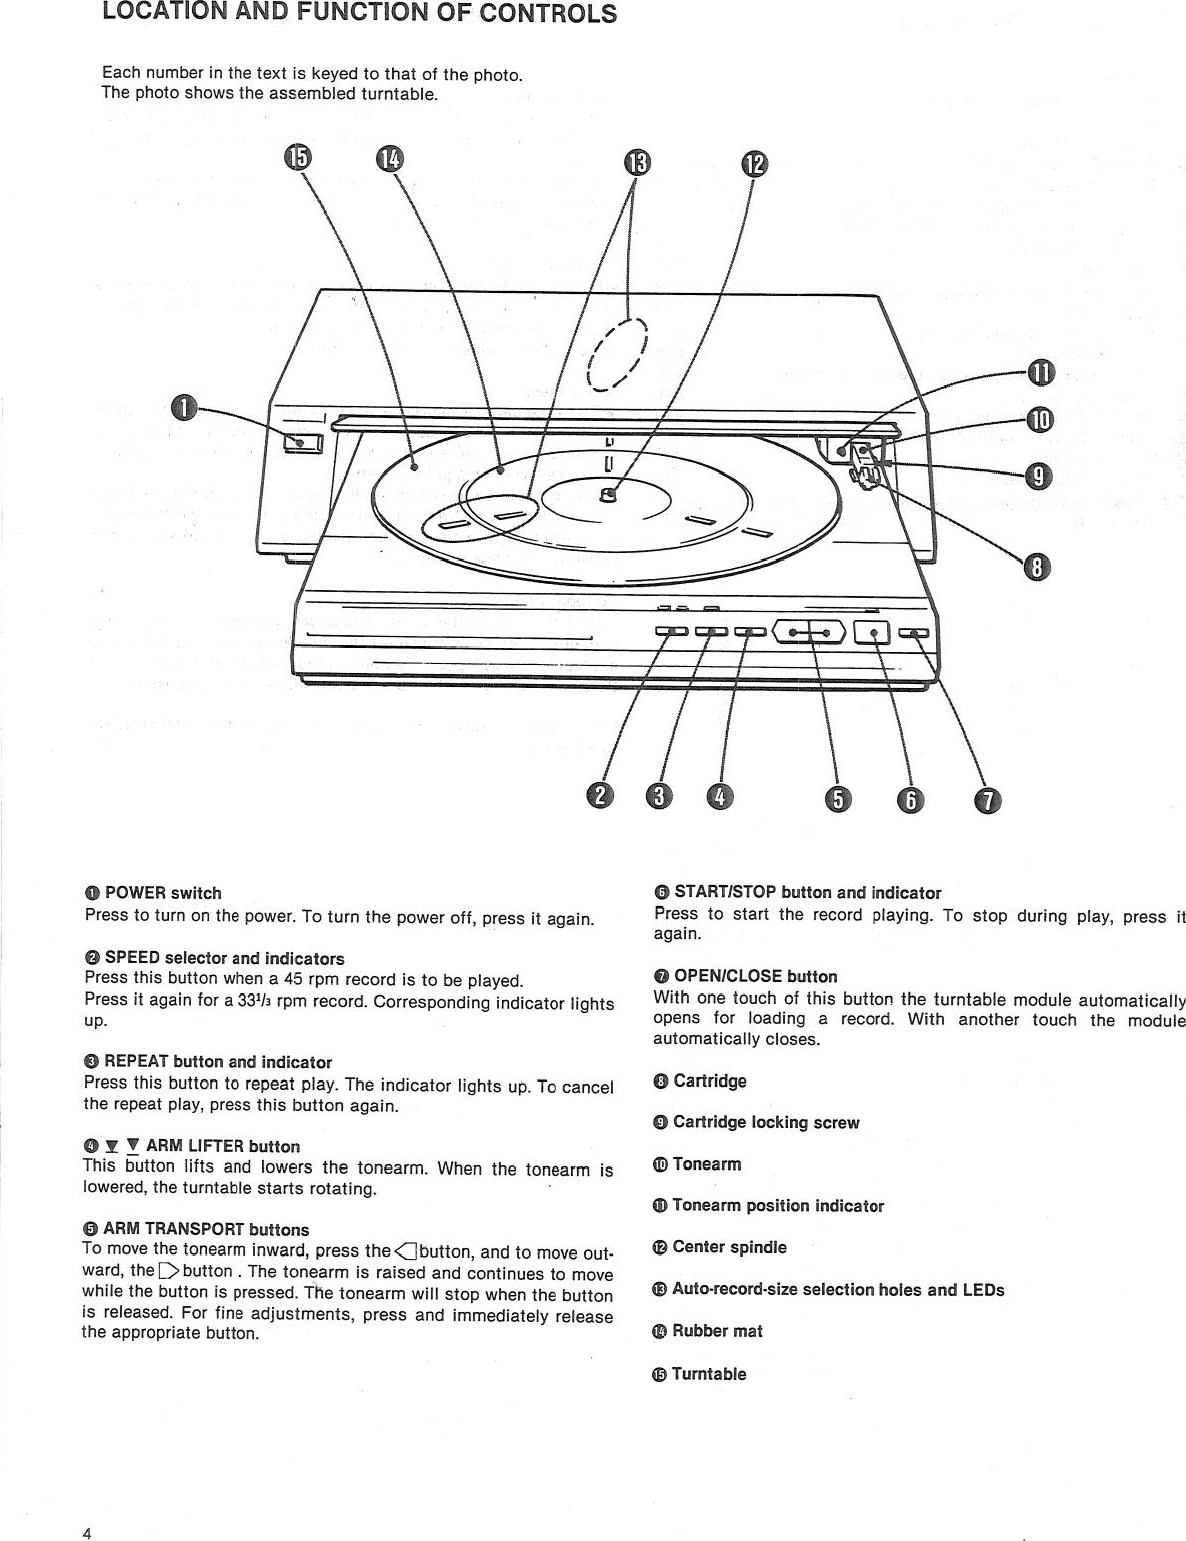 Page 4 of 11 - Sony Sony-Sony-Turntable-Ps-Fl7-Ii-Users-Manual-  Sony-sony-turntable-ps-fl7-ii-users-manual